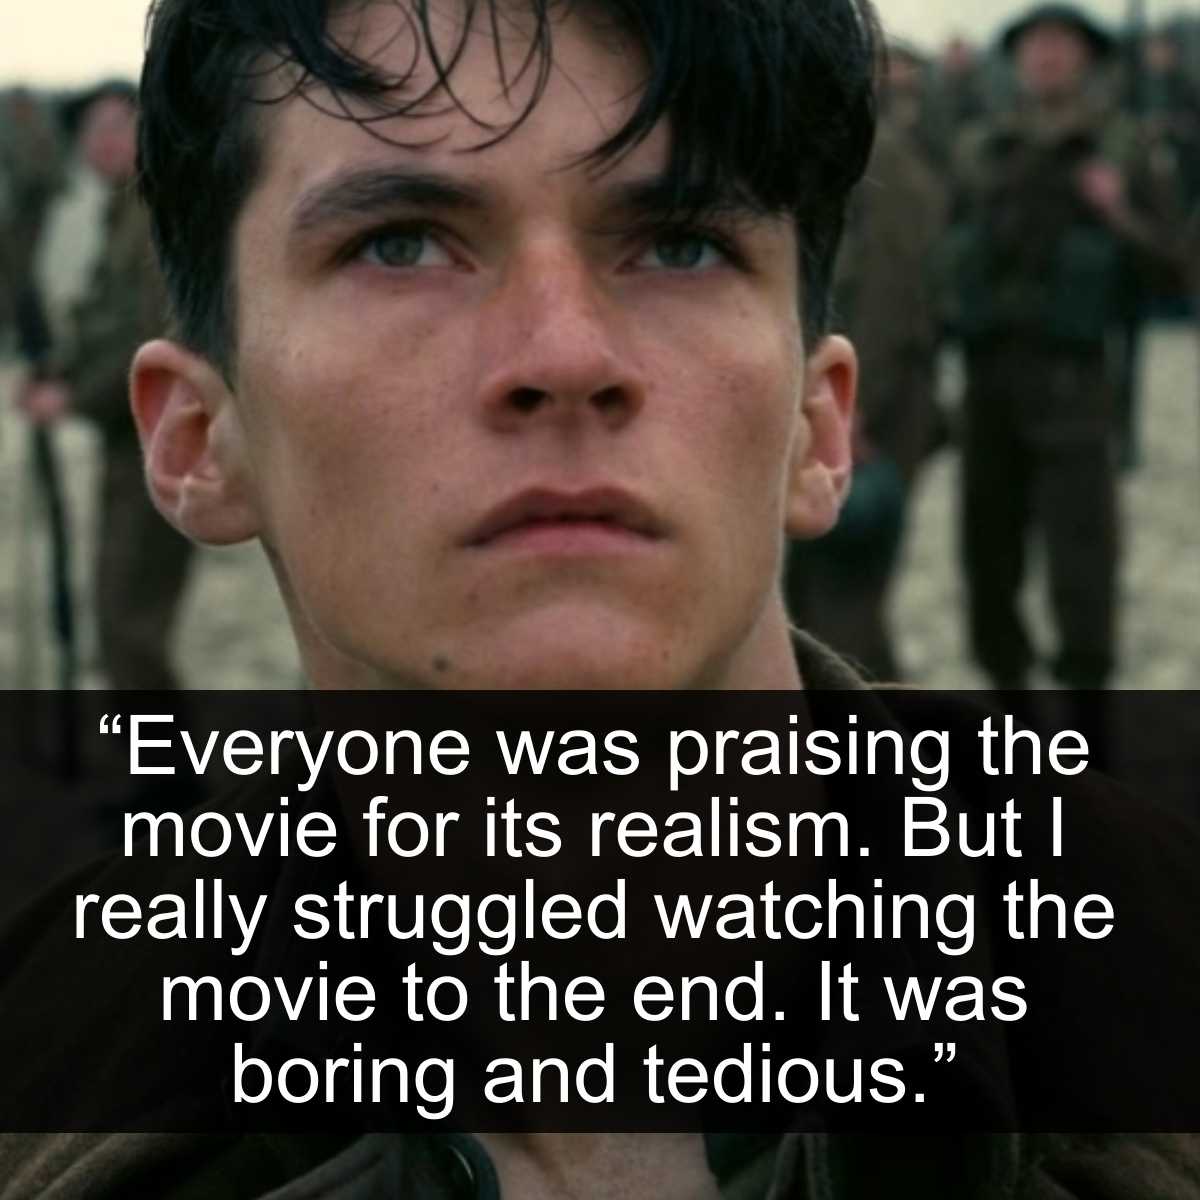 <p>Christopher Nolan is known for making wild and ambitious projects come to life. While he's made a ton of great films that will live in infamy, Dunkirk is not one of them. Supposedly, the critics loved how realistic this war-driven saga of a movie is depicted. However, while traumatic and catastrophic, war is not that tedious. The pacing of the film drags on and on for something that's supposed to be tense and narrative-driven.</p> <p>So many extra scenes could have been left out that this movie had potential. Instead, it just felt like someone gave Christopher Nolan a terrible crash course in history. Then, he tried to provide it with an action twist. Nobody asked for that.</p>